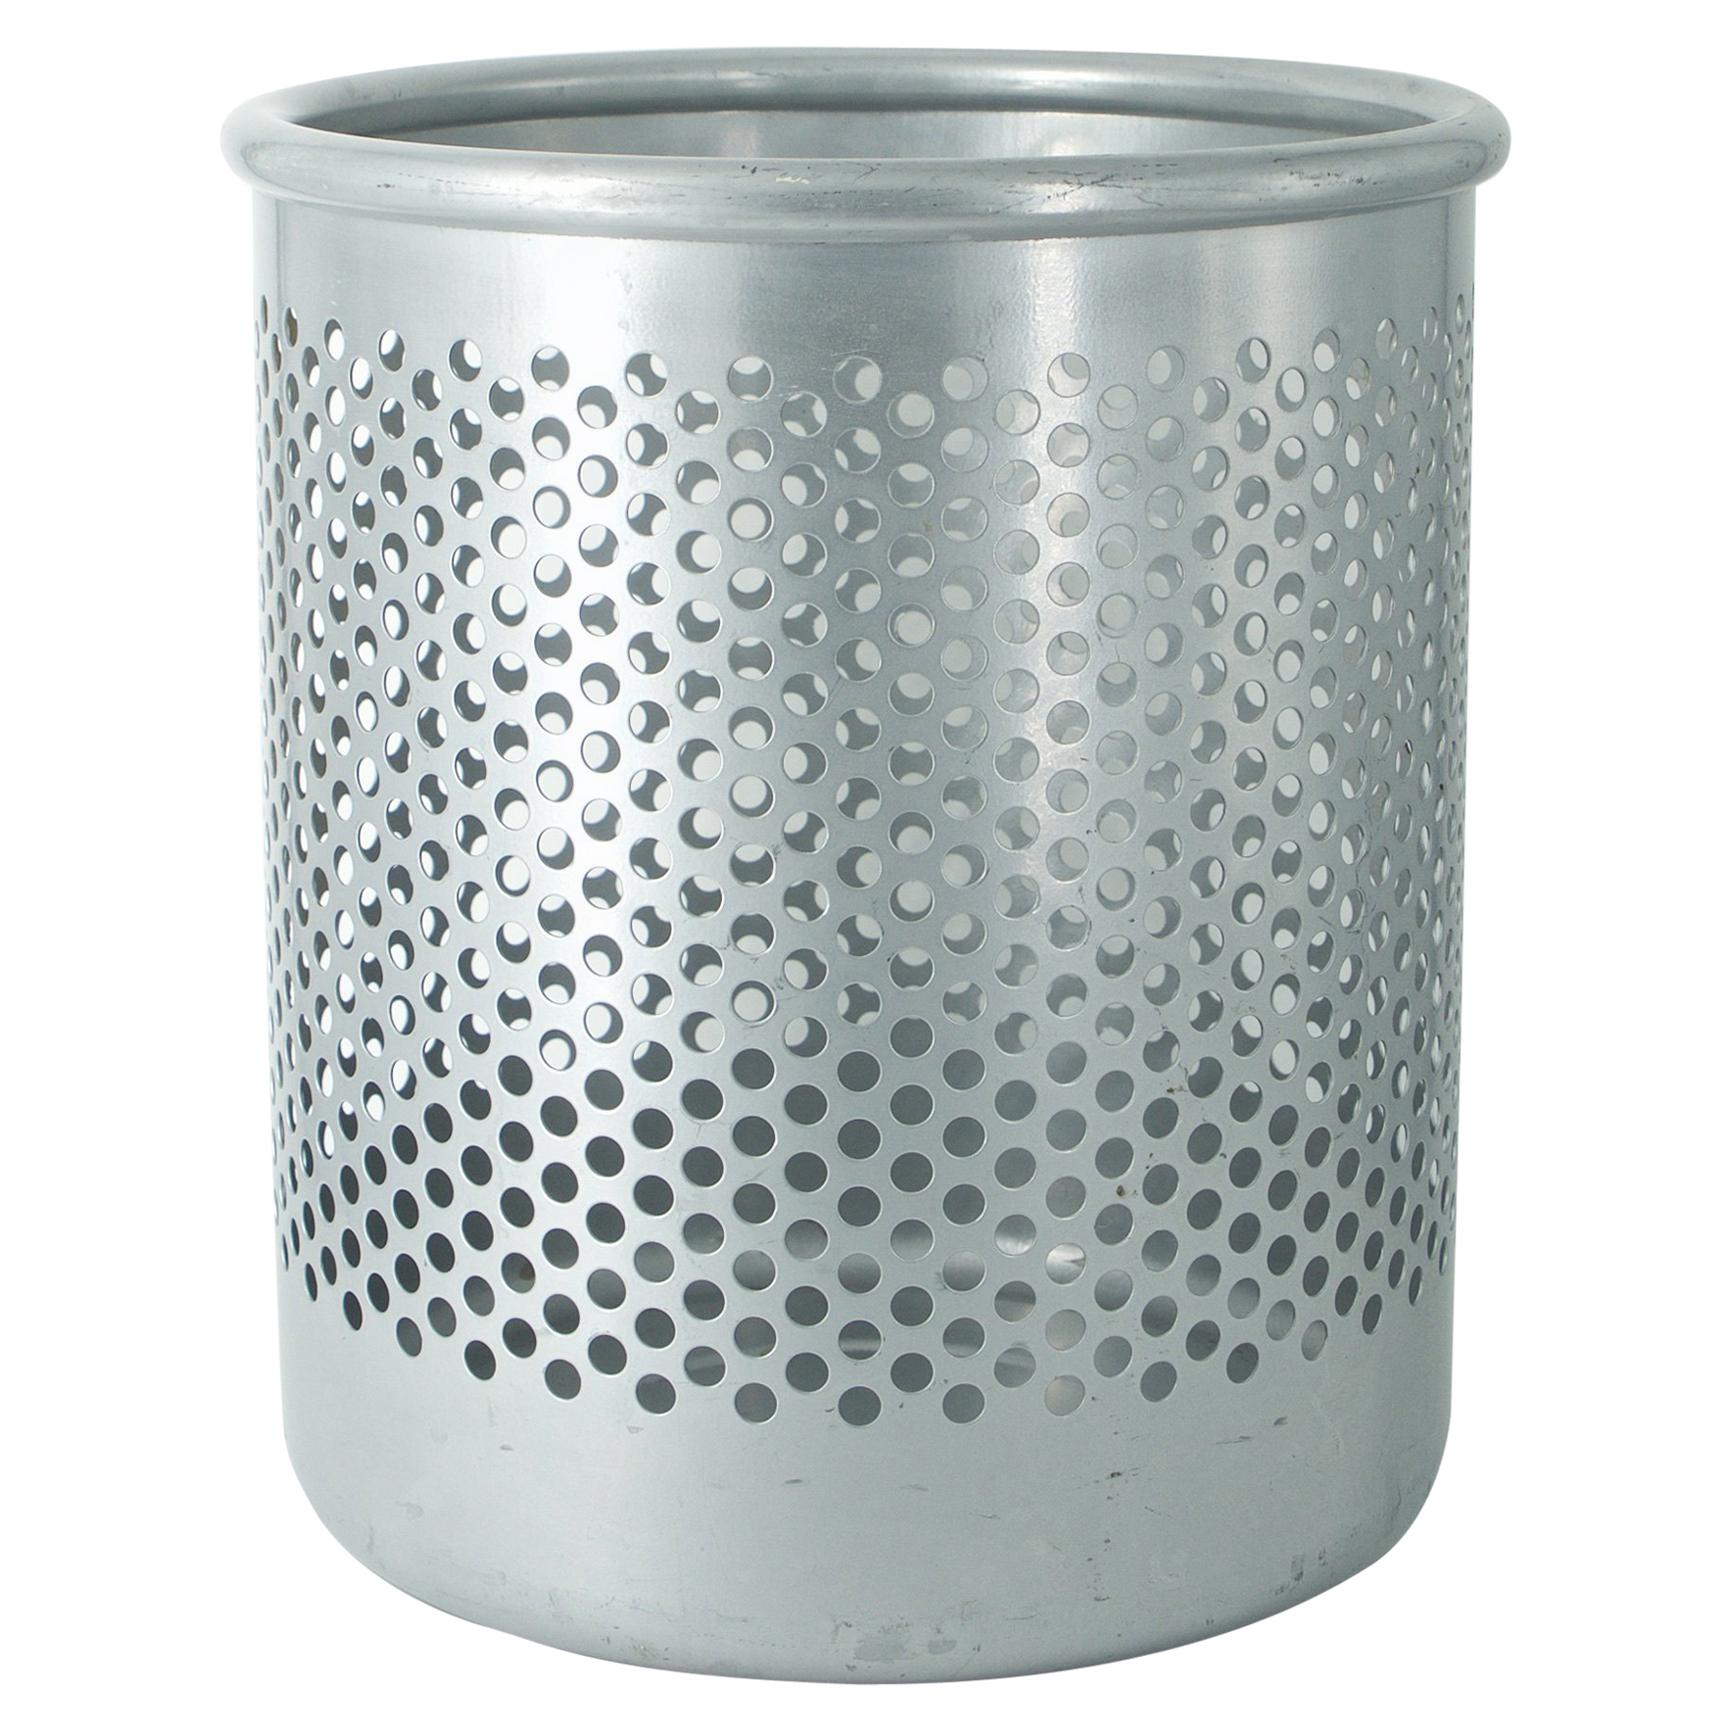 Grey Perforated Metal Office Wastebasket Trash Can Italy Memphis Sottsass OSX